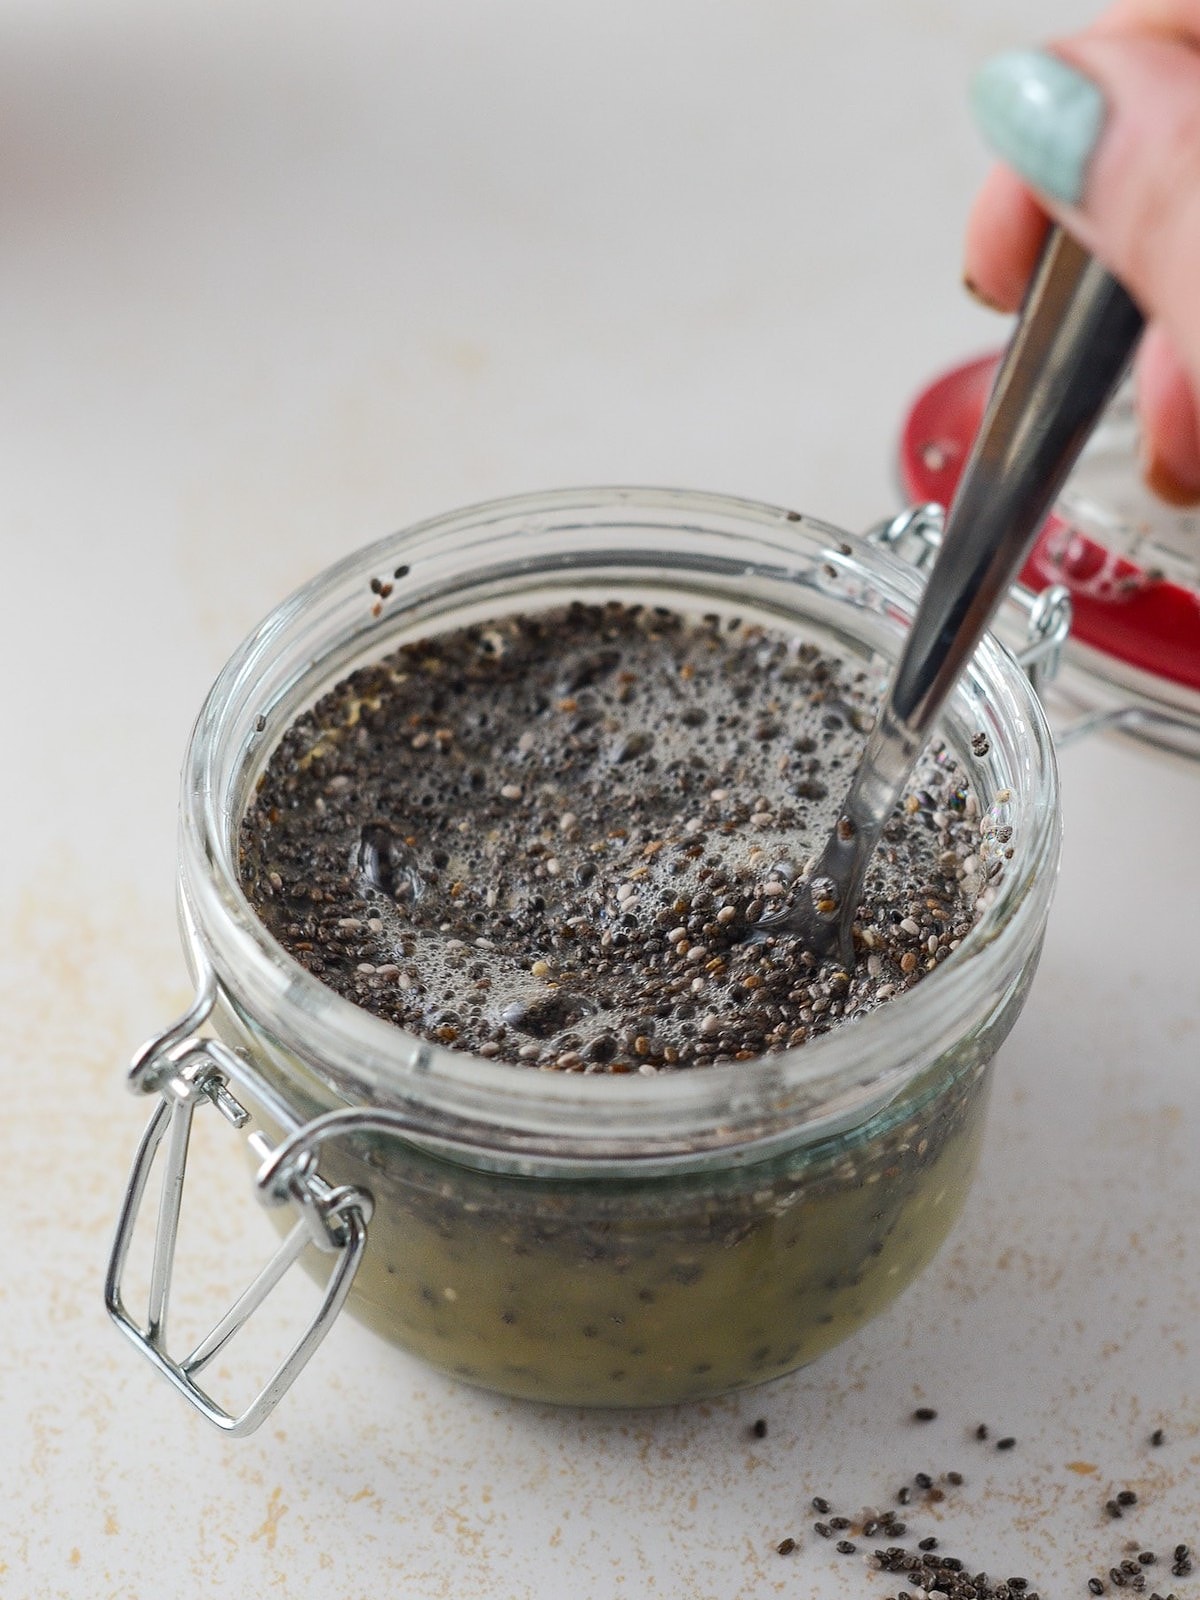 This is a photo of chia seed pudding being mixed with a spoon.